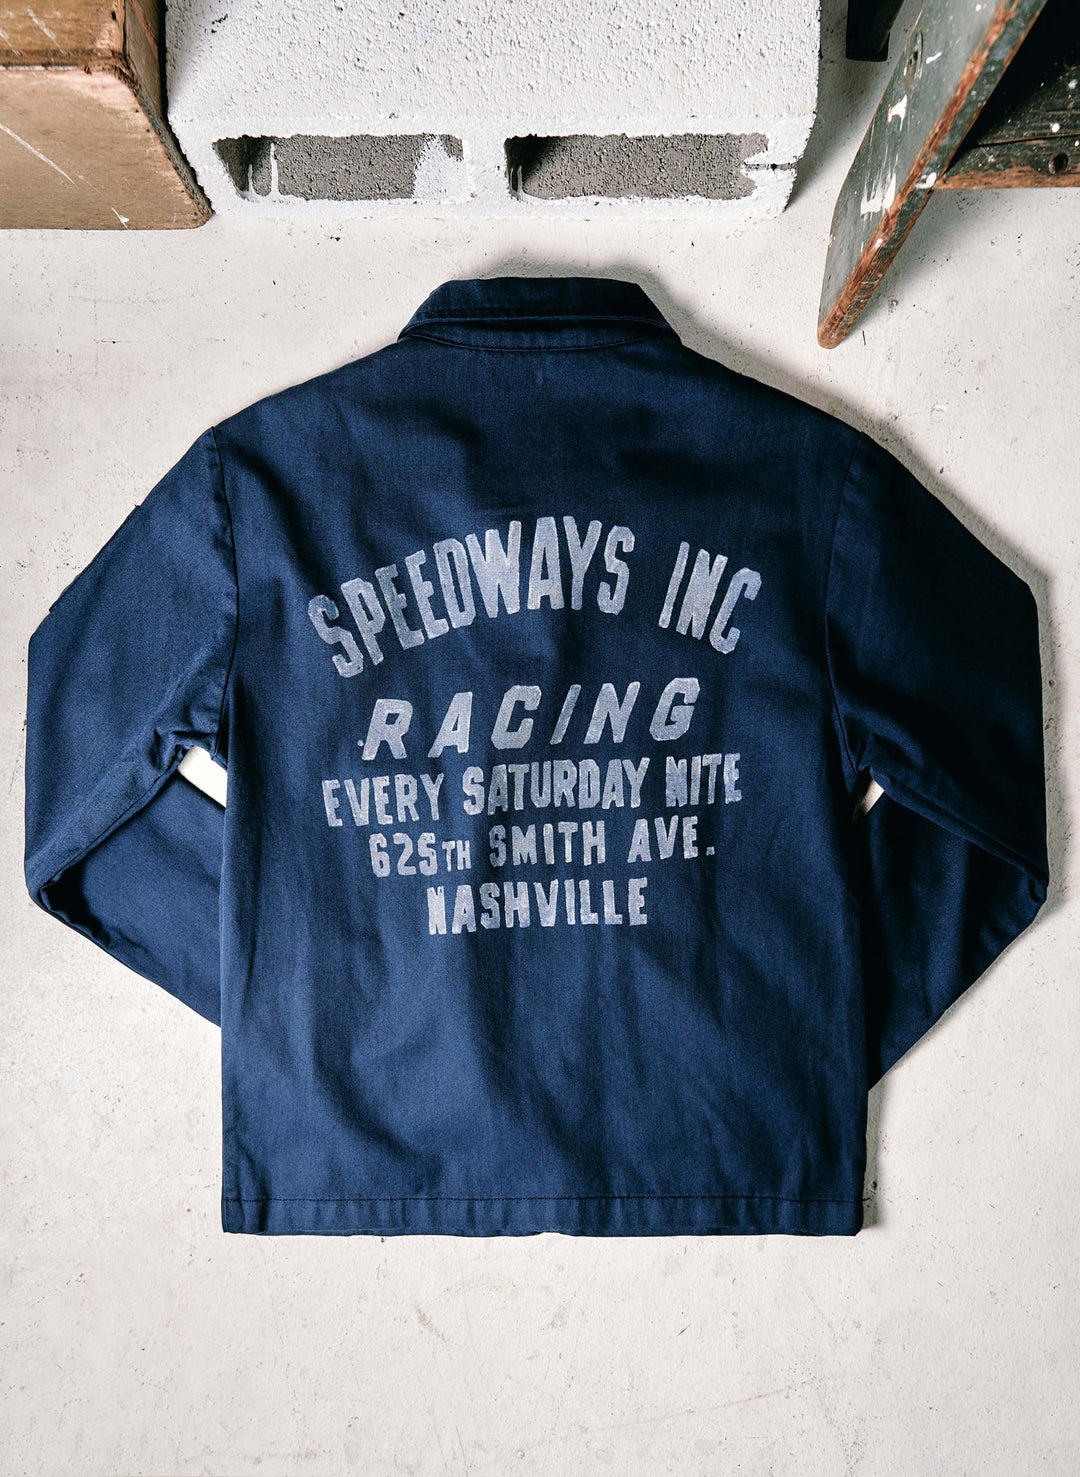 a blue jacket with white text on it